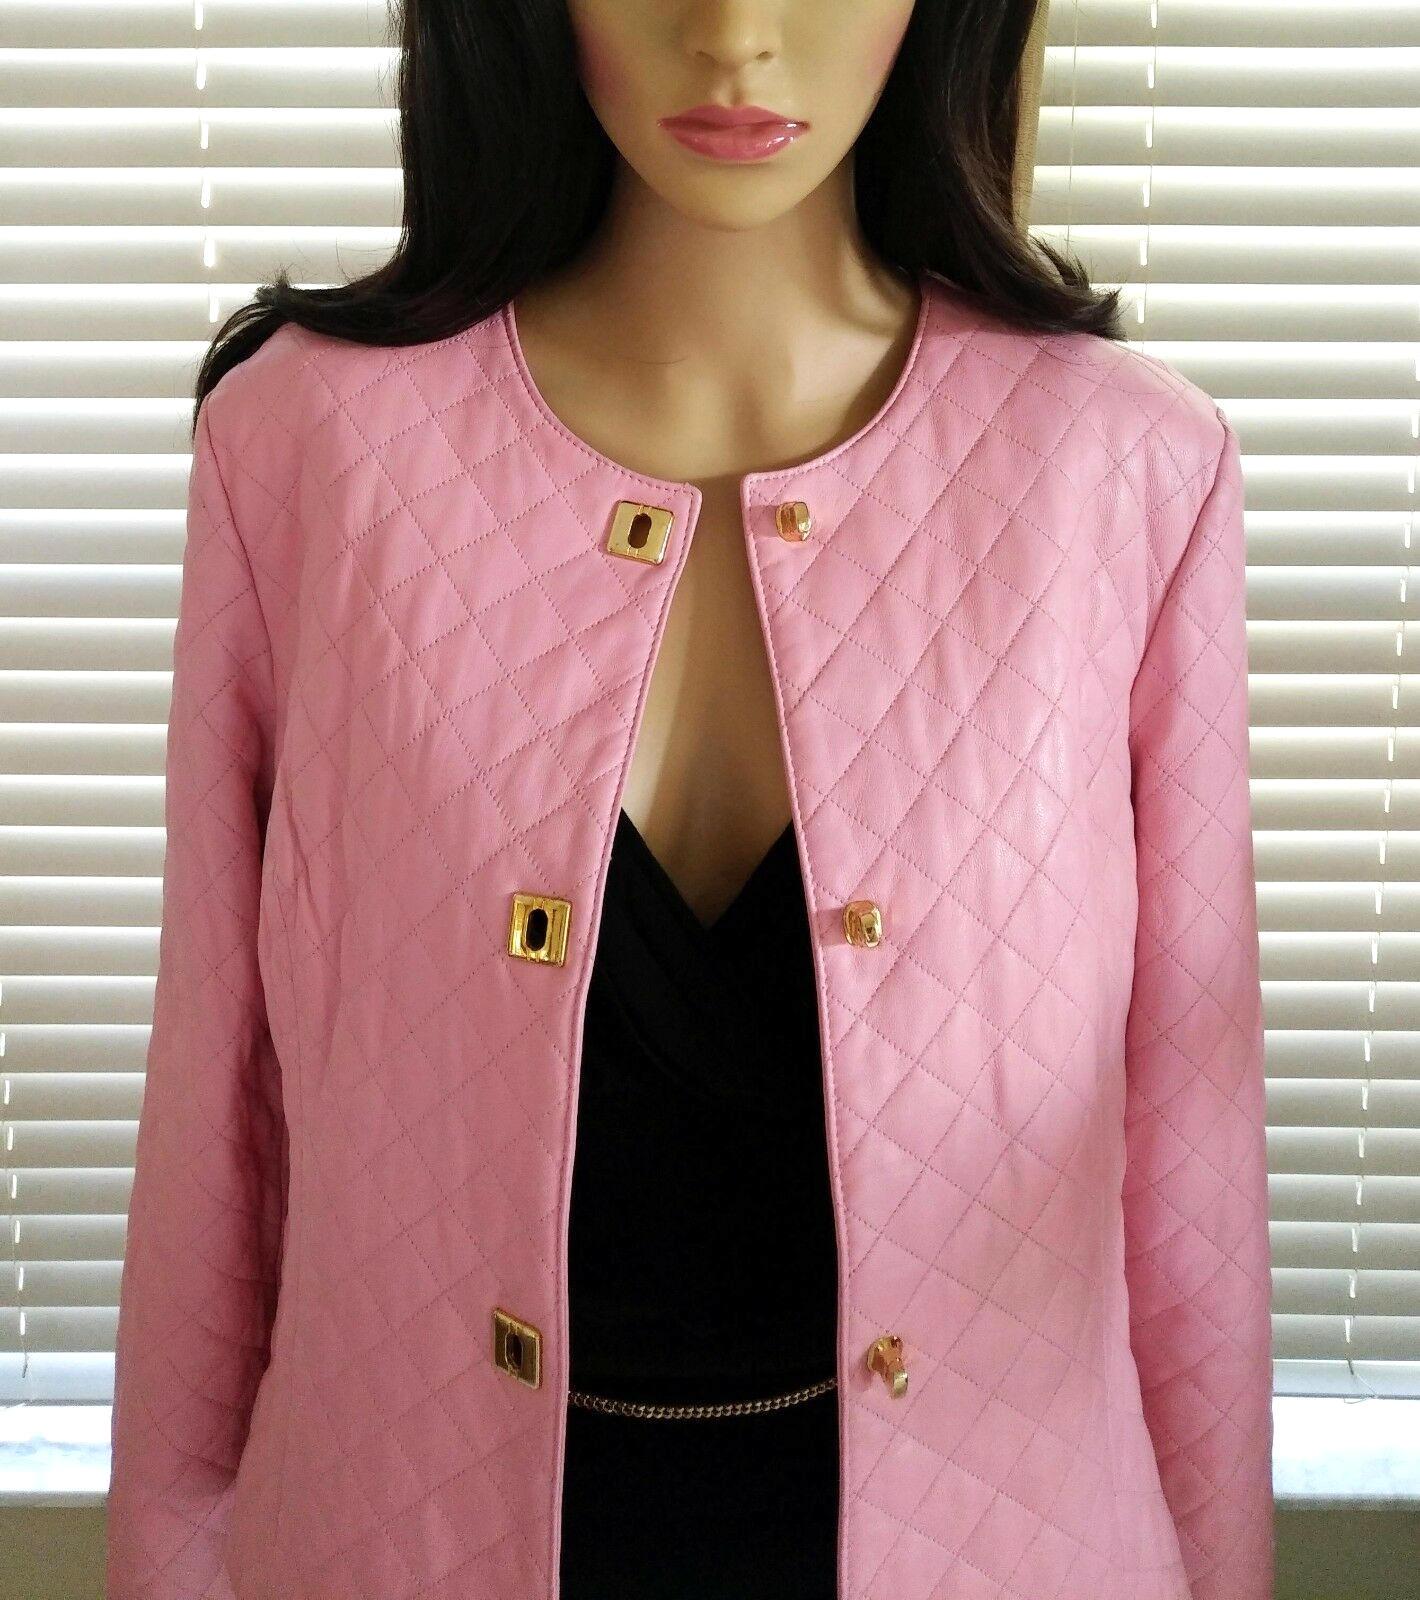  Gianfranco Ferre Petal Pink Quilted Lambskin Leather Jacket EU 38/ US 4 6 For Sale 4